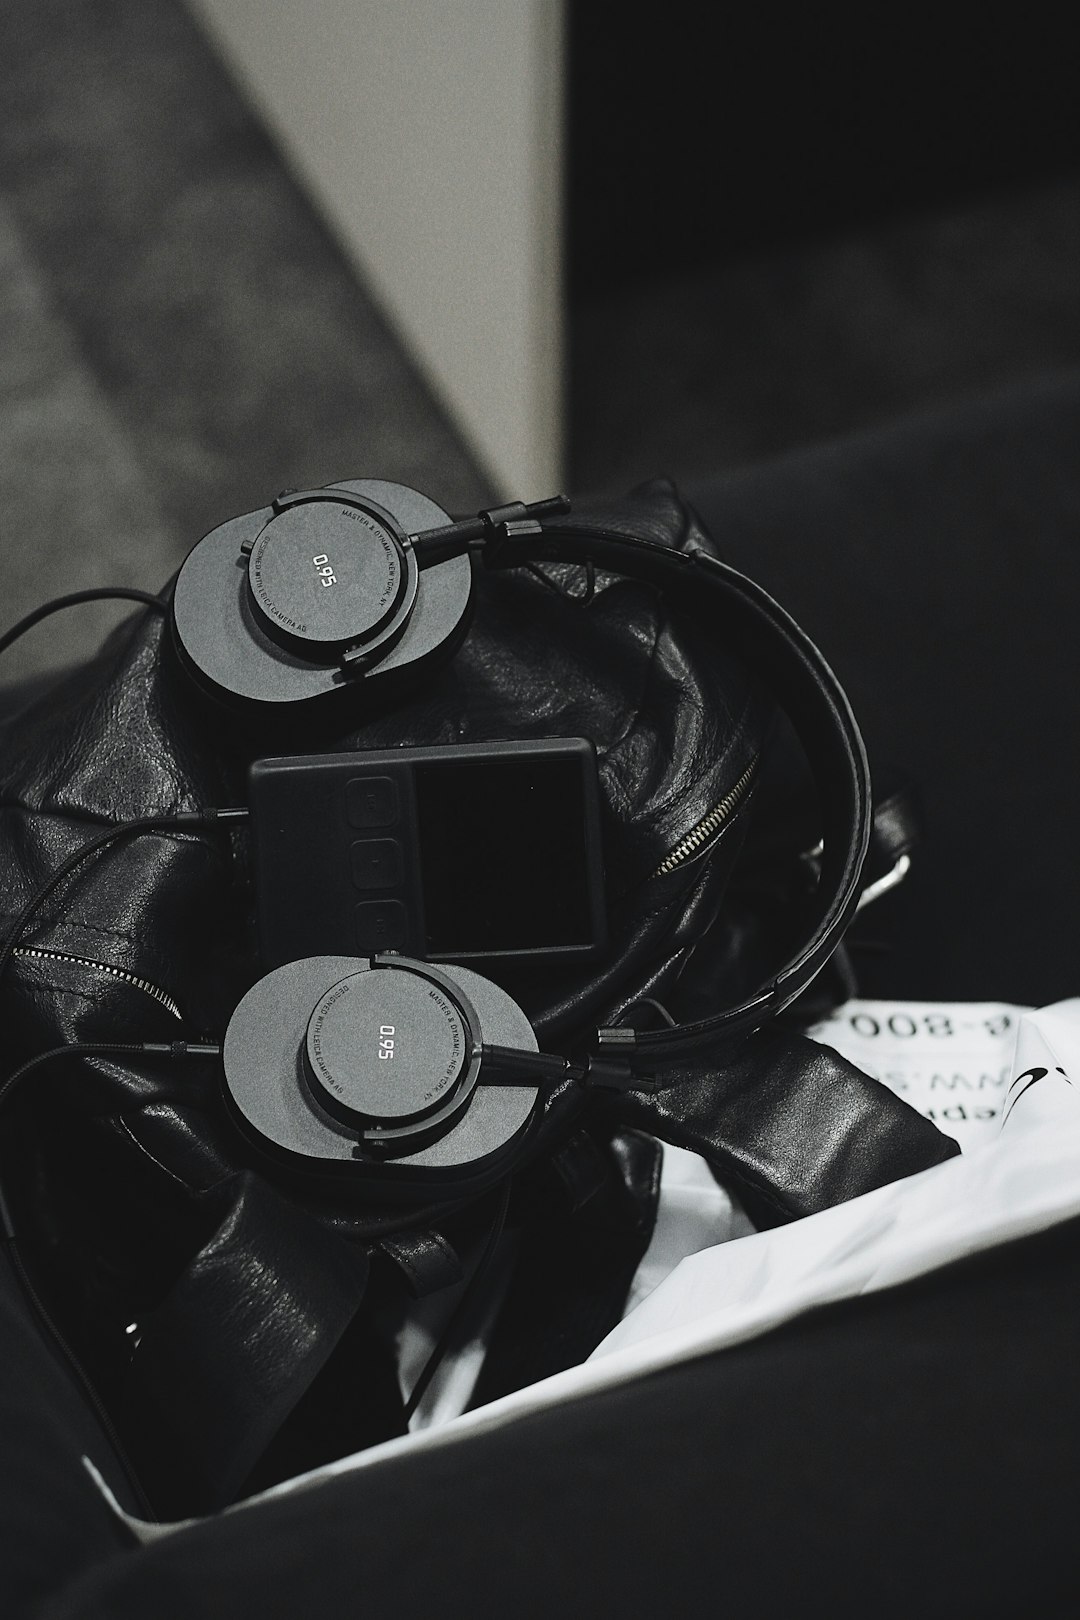 grayscale photo of headset and music player